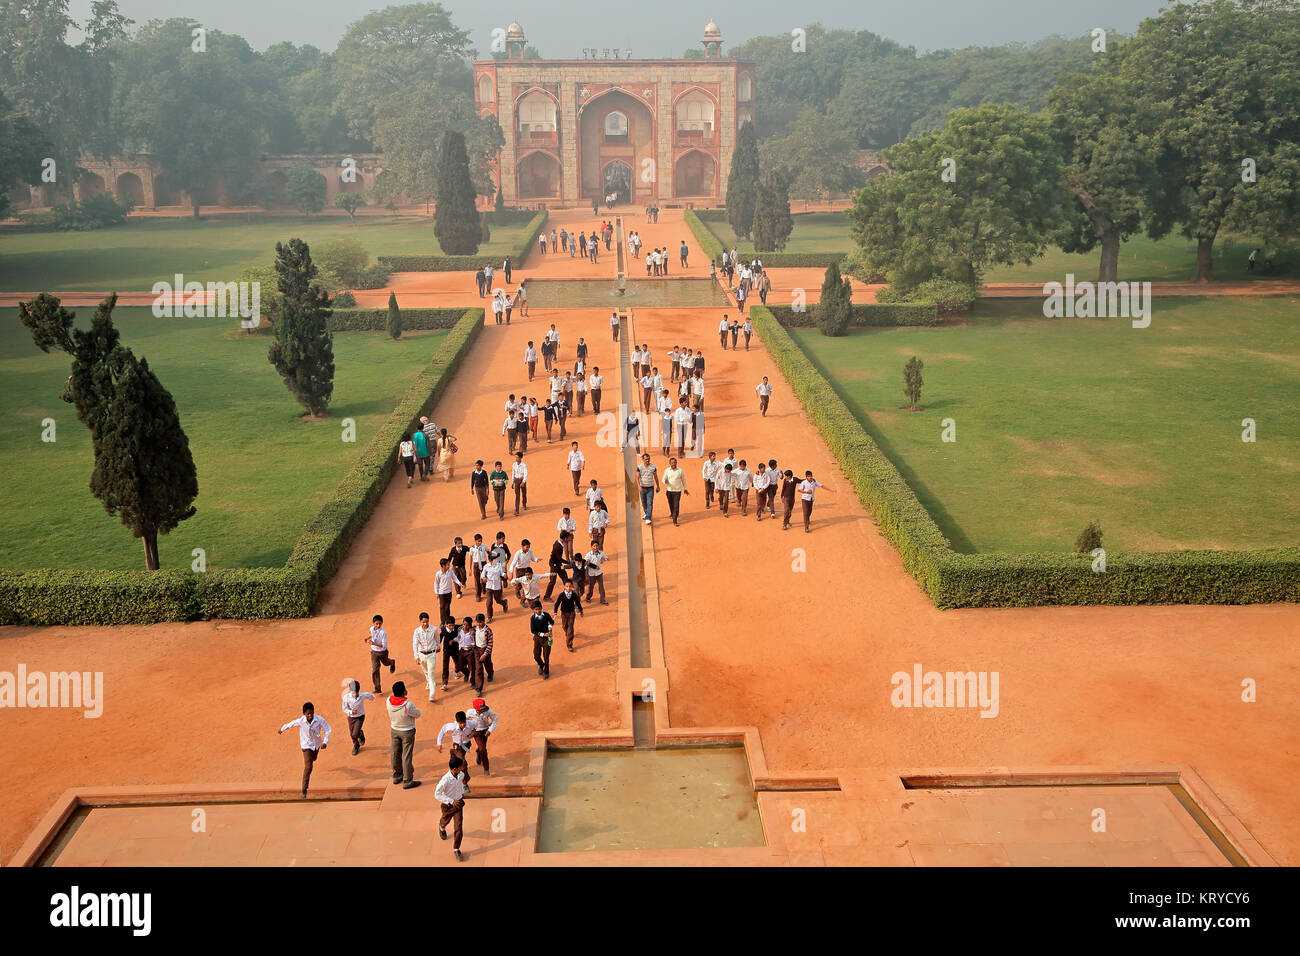 DELHI, INDIA - NOVEMBER 23, 2015: Visitors at the entrance to the historical Humayuns tomb and garden - a UNESCO world heritage site Stock Photo